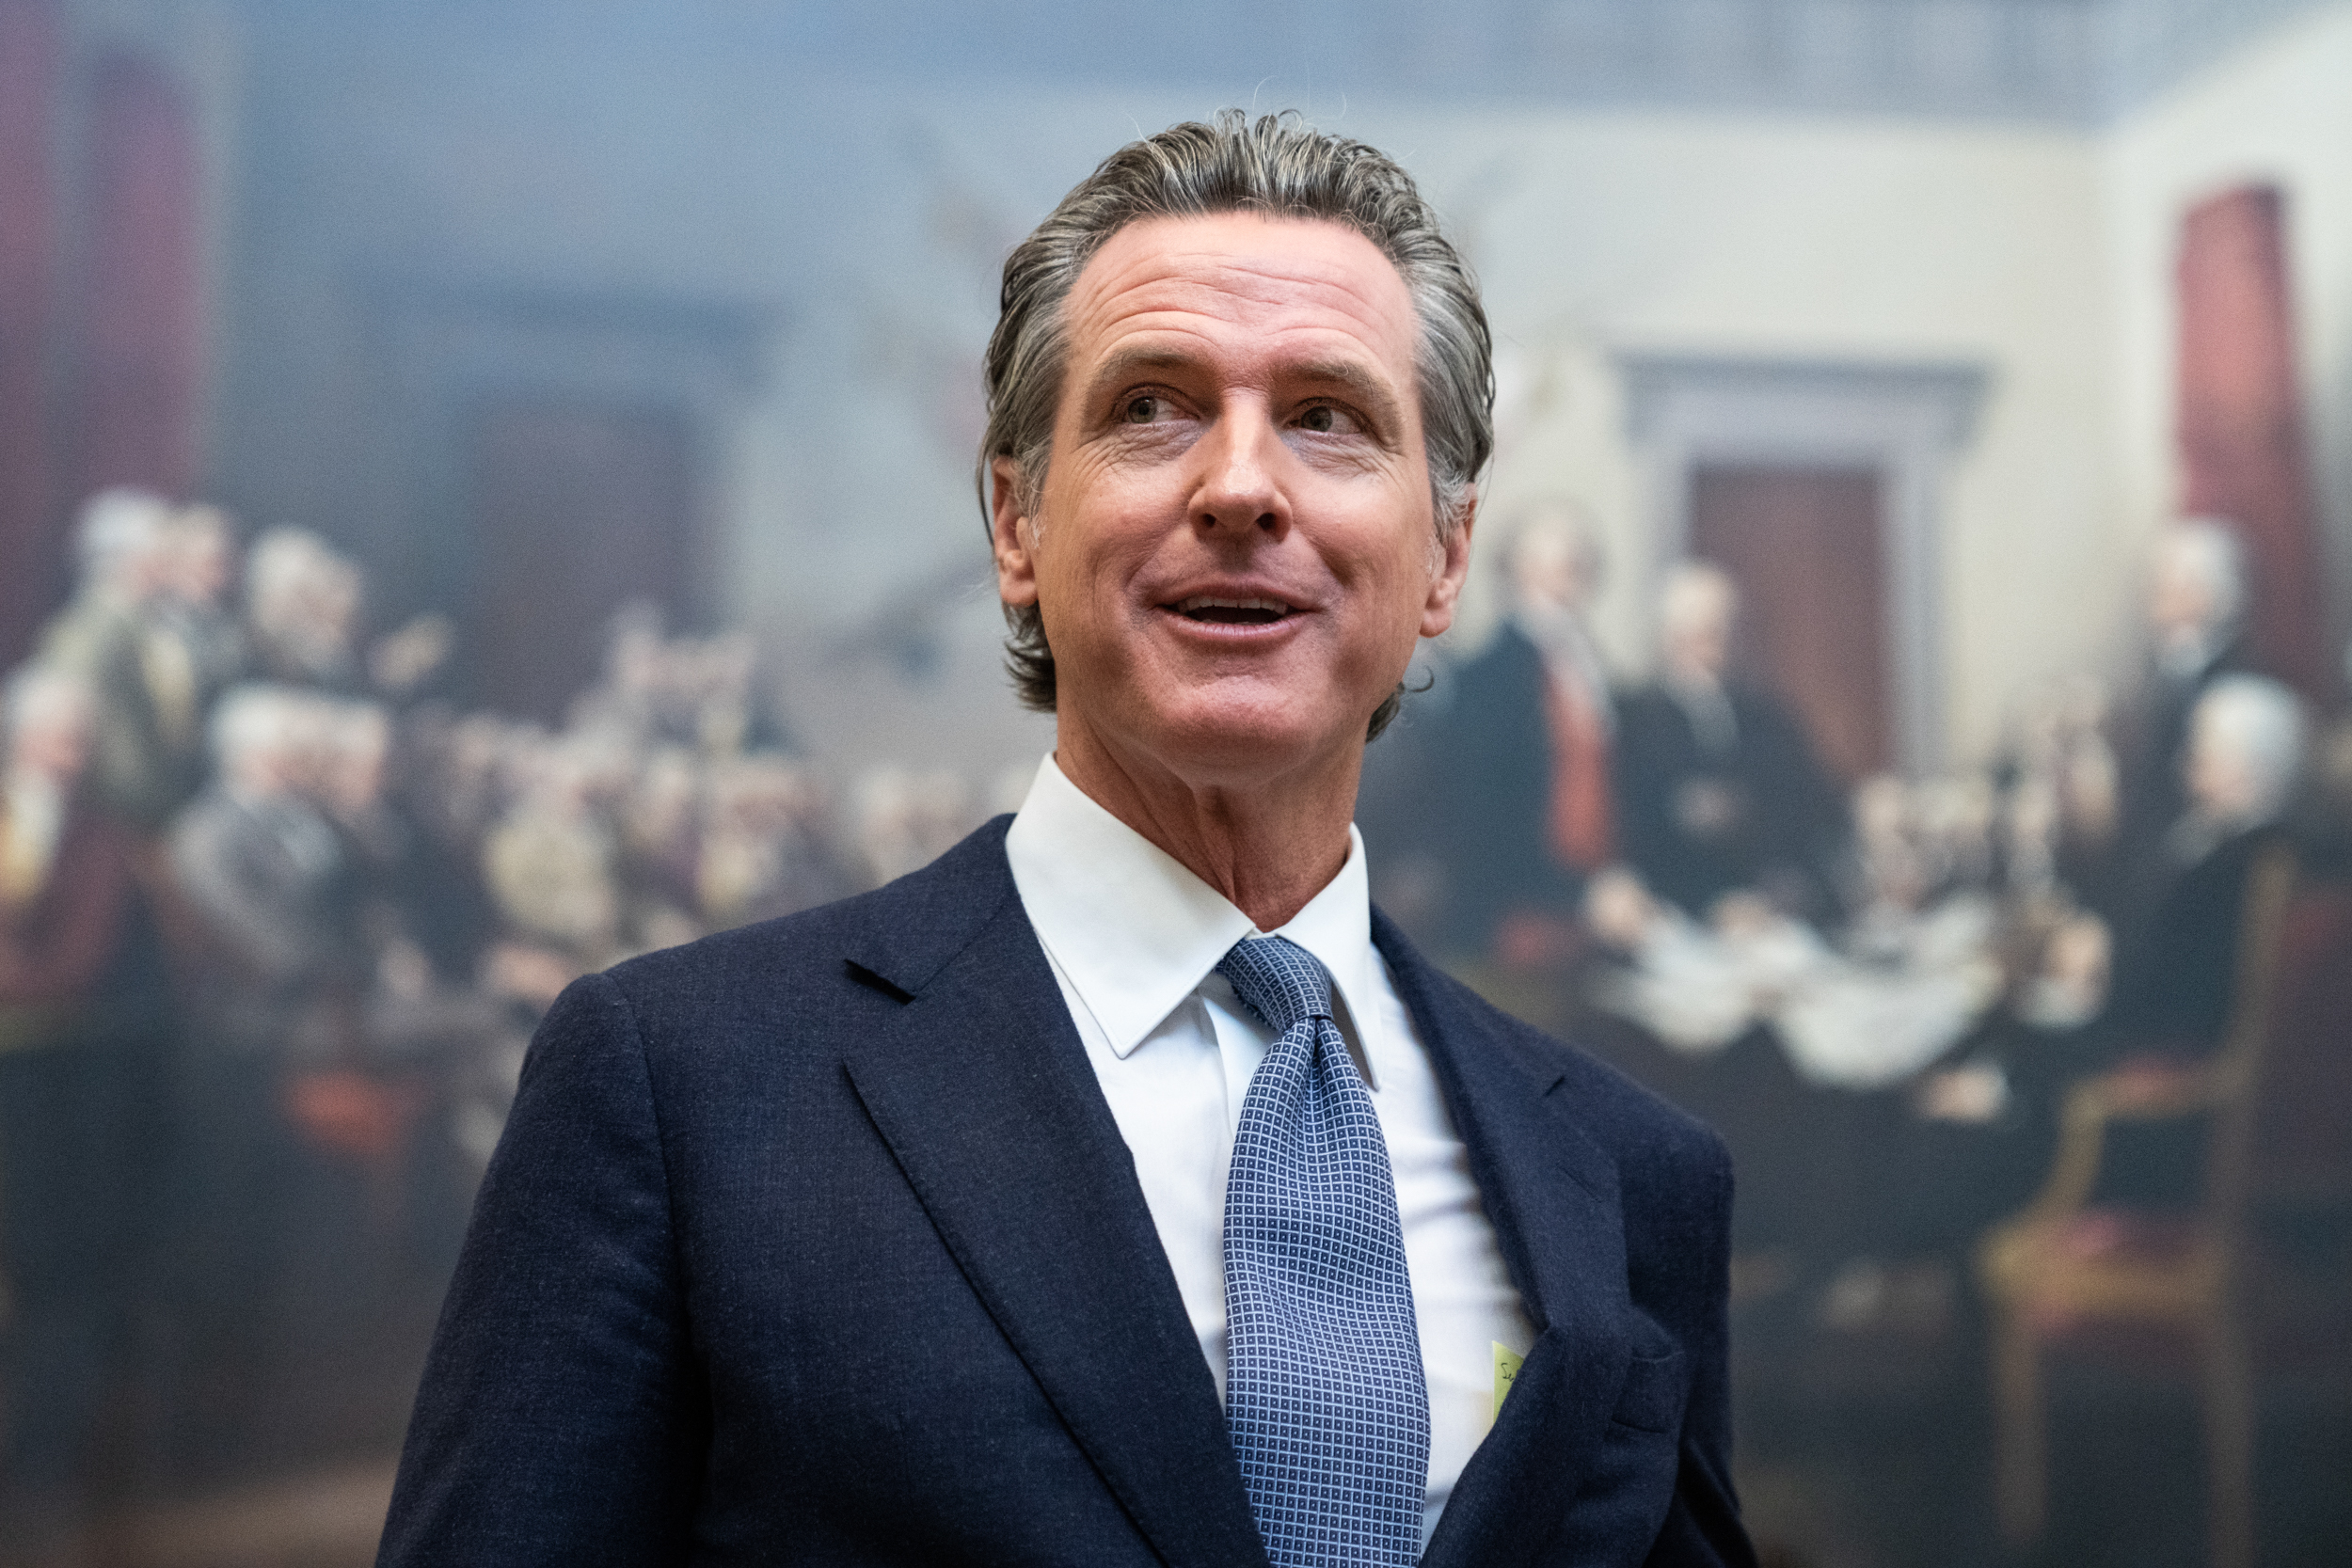 Governor Gavin Newsom stands in front of a painting wearing a navy blue suit jacket, a white collared shirt and a blue patterned tie.